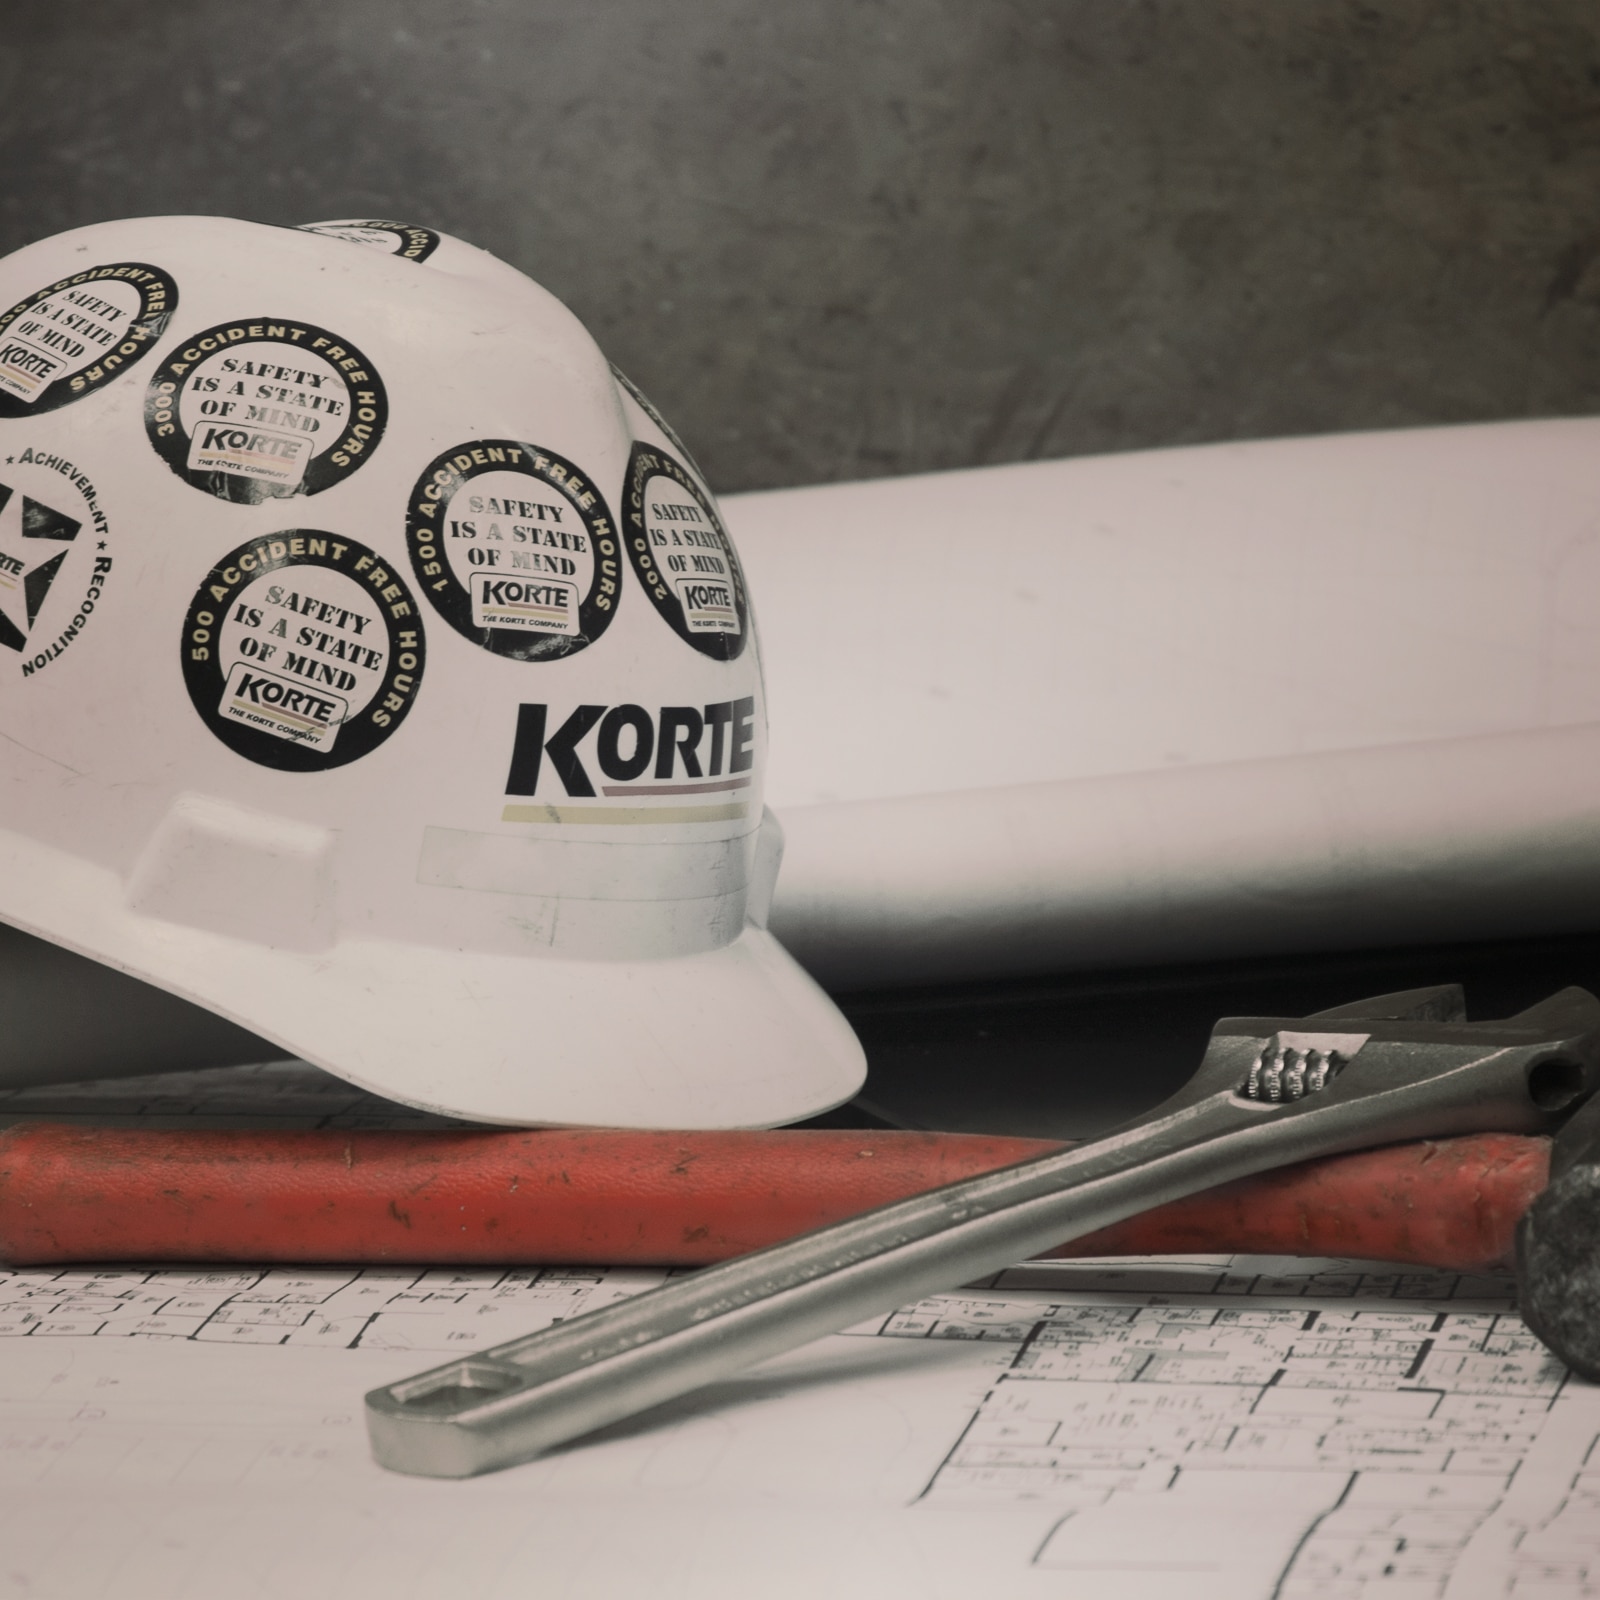  Know your builder: Company culture in construction